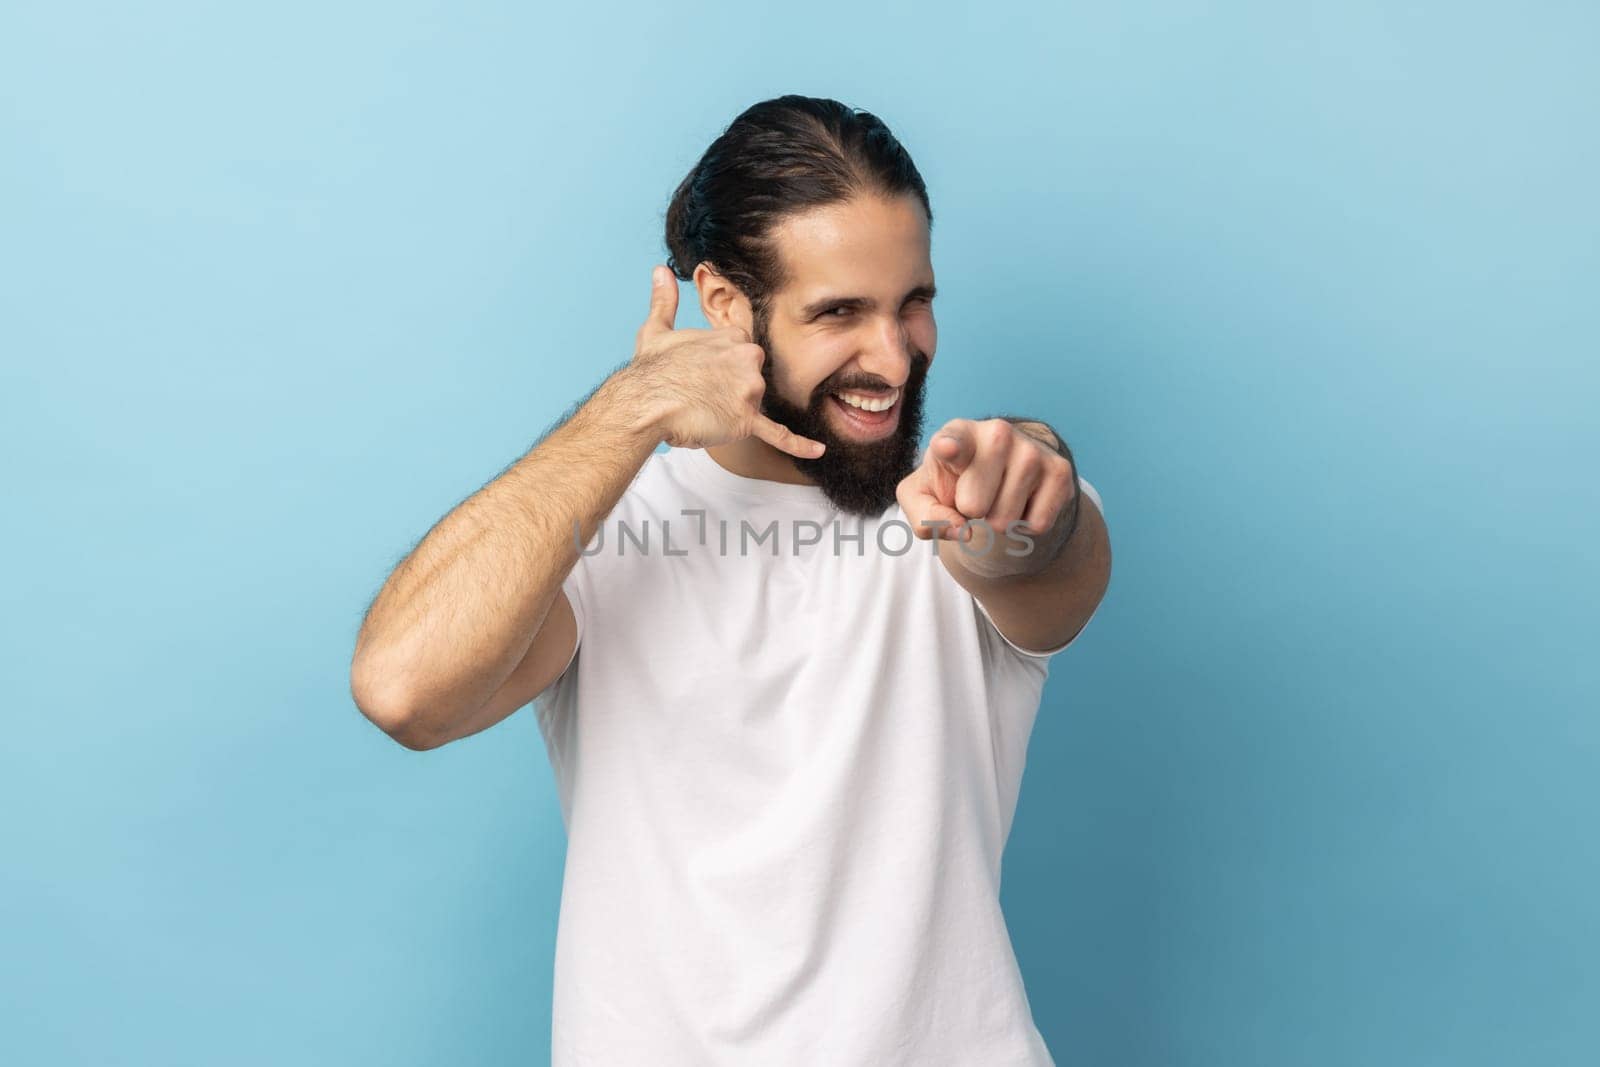 Hey you, call me. Man with beard wearing white T-shirt doing talking on telephone gesture and smiling, flirting, asking contact, pointing to camera. Indoor studio shot isolated on blue background.